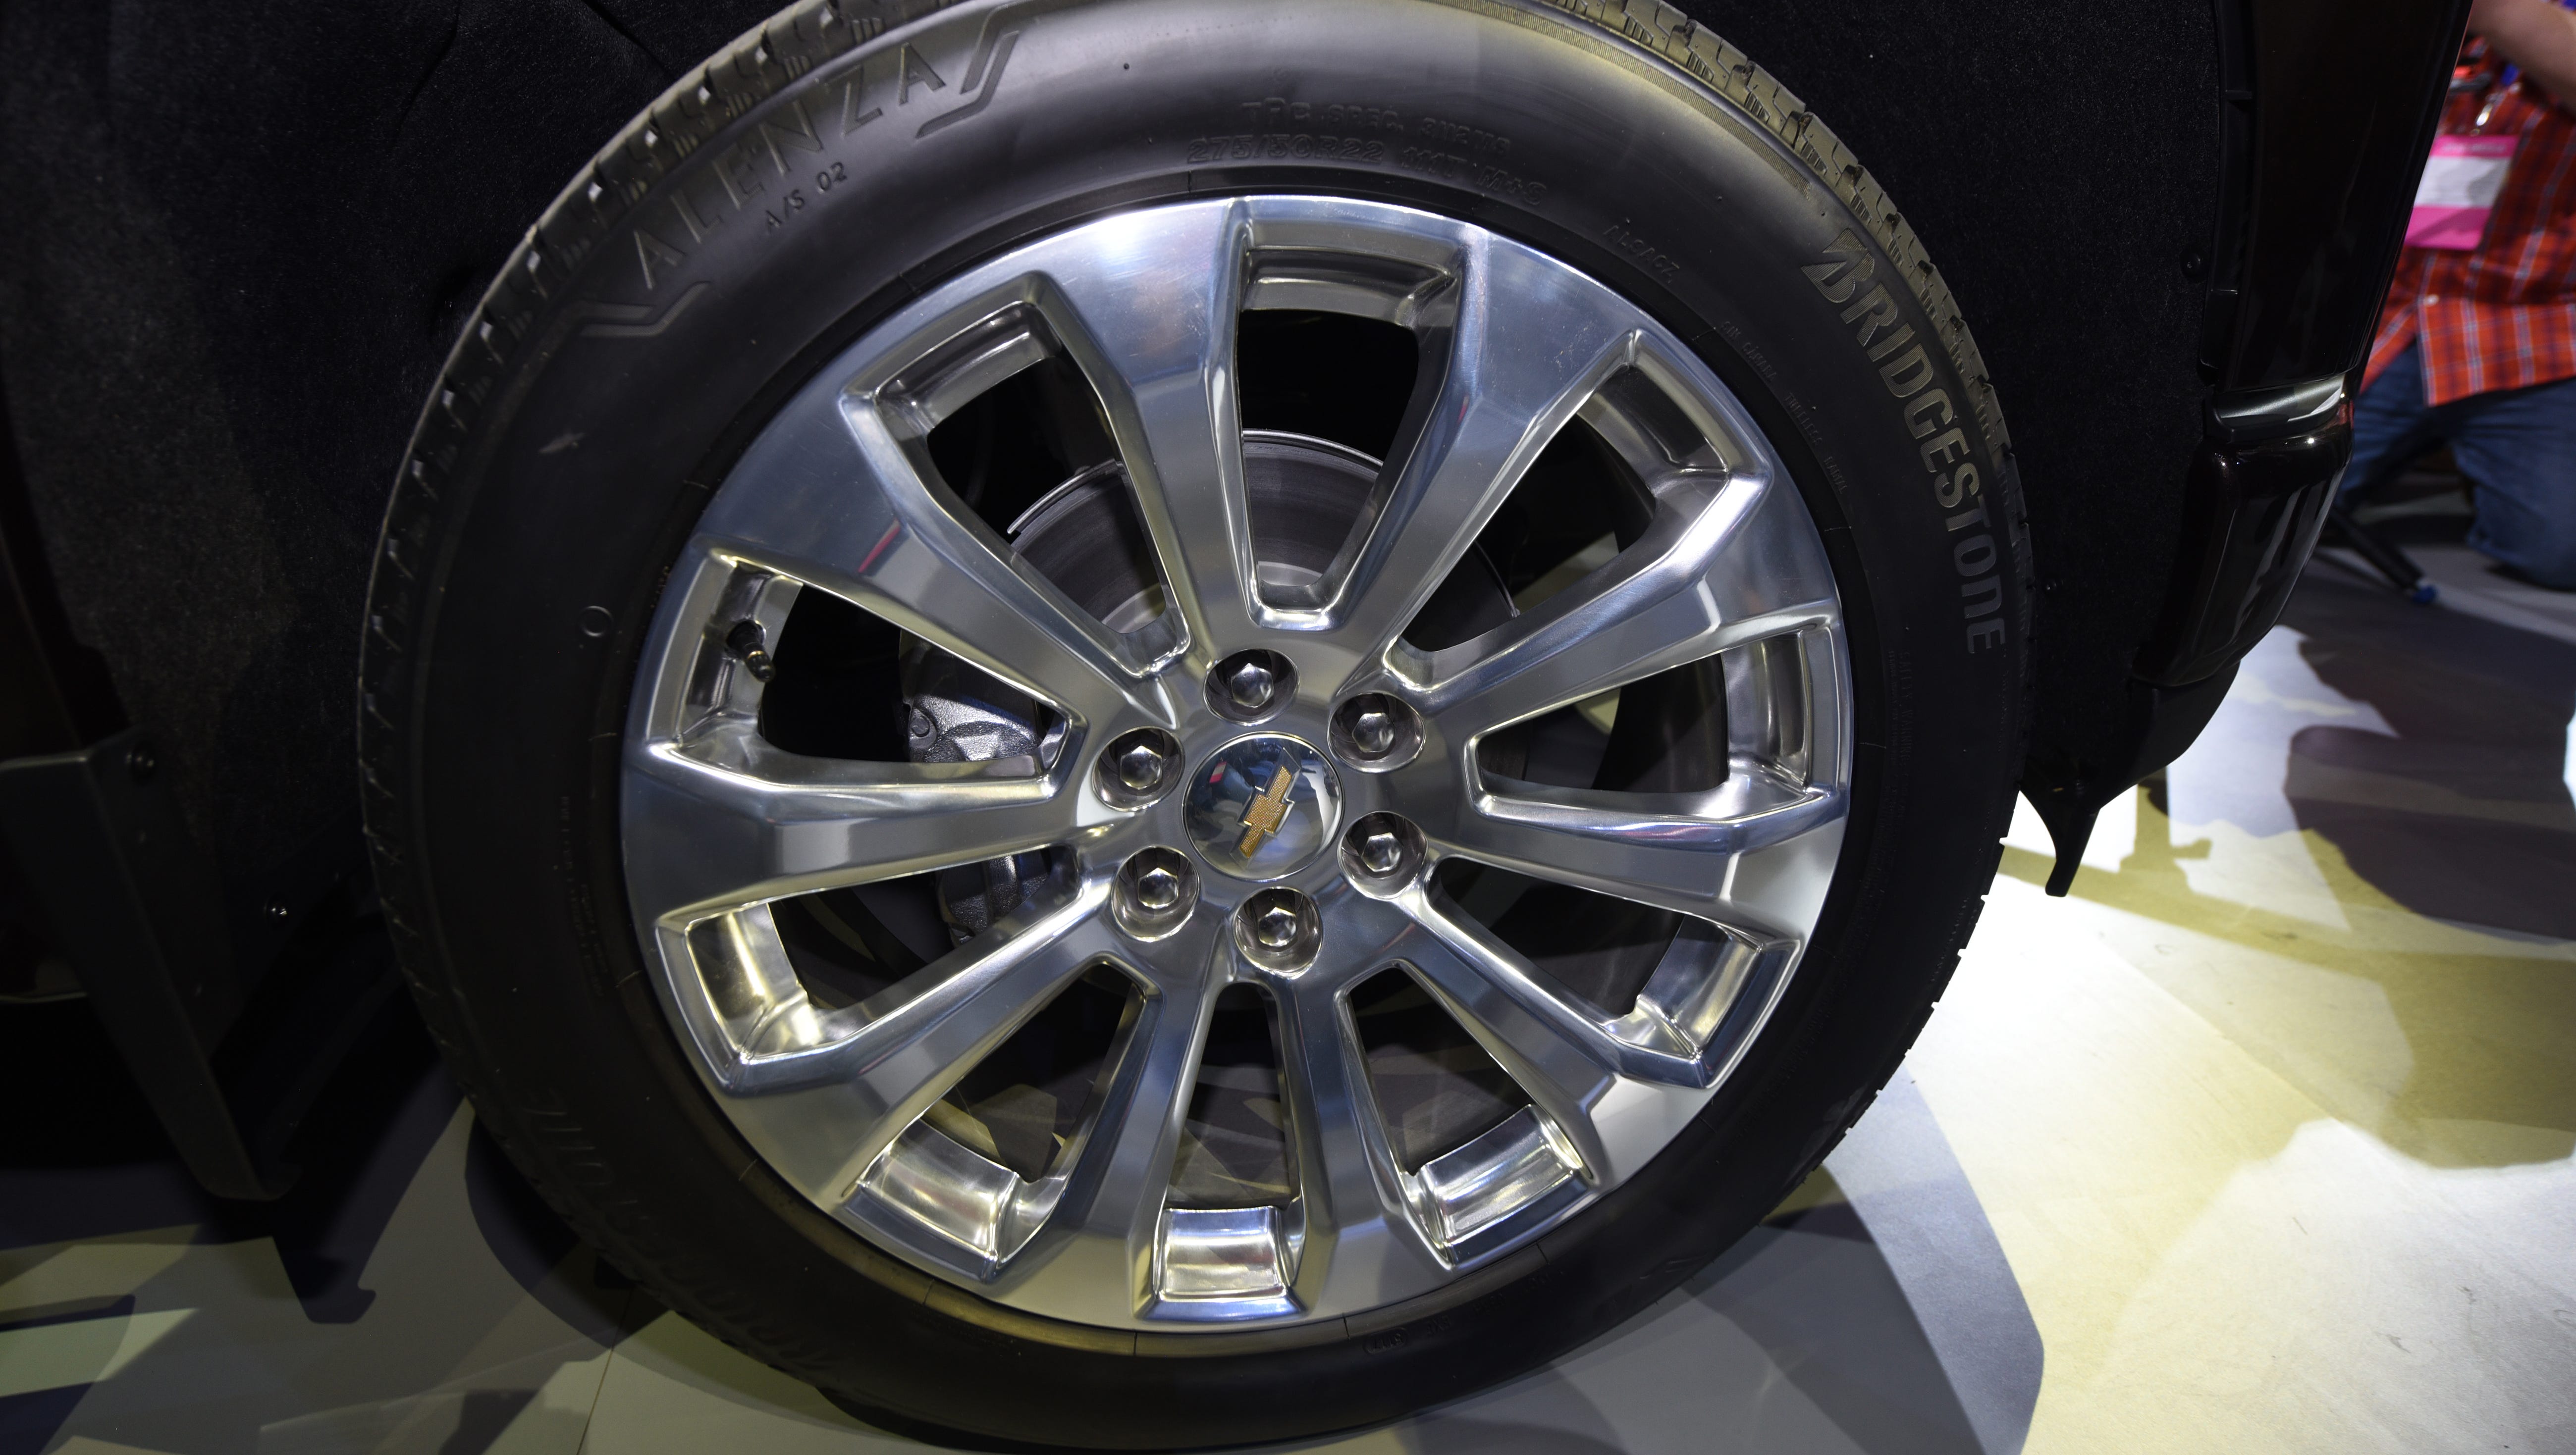 The 2019 Chevy Silverado High Country's polished rims.